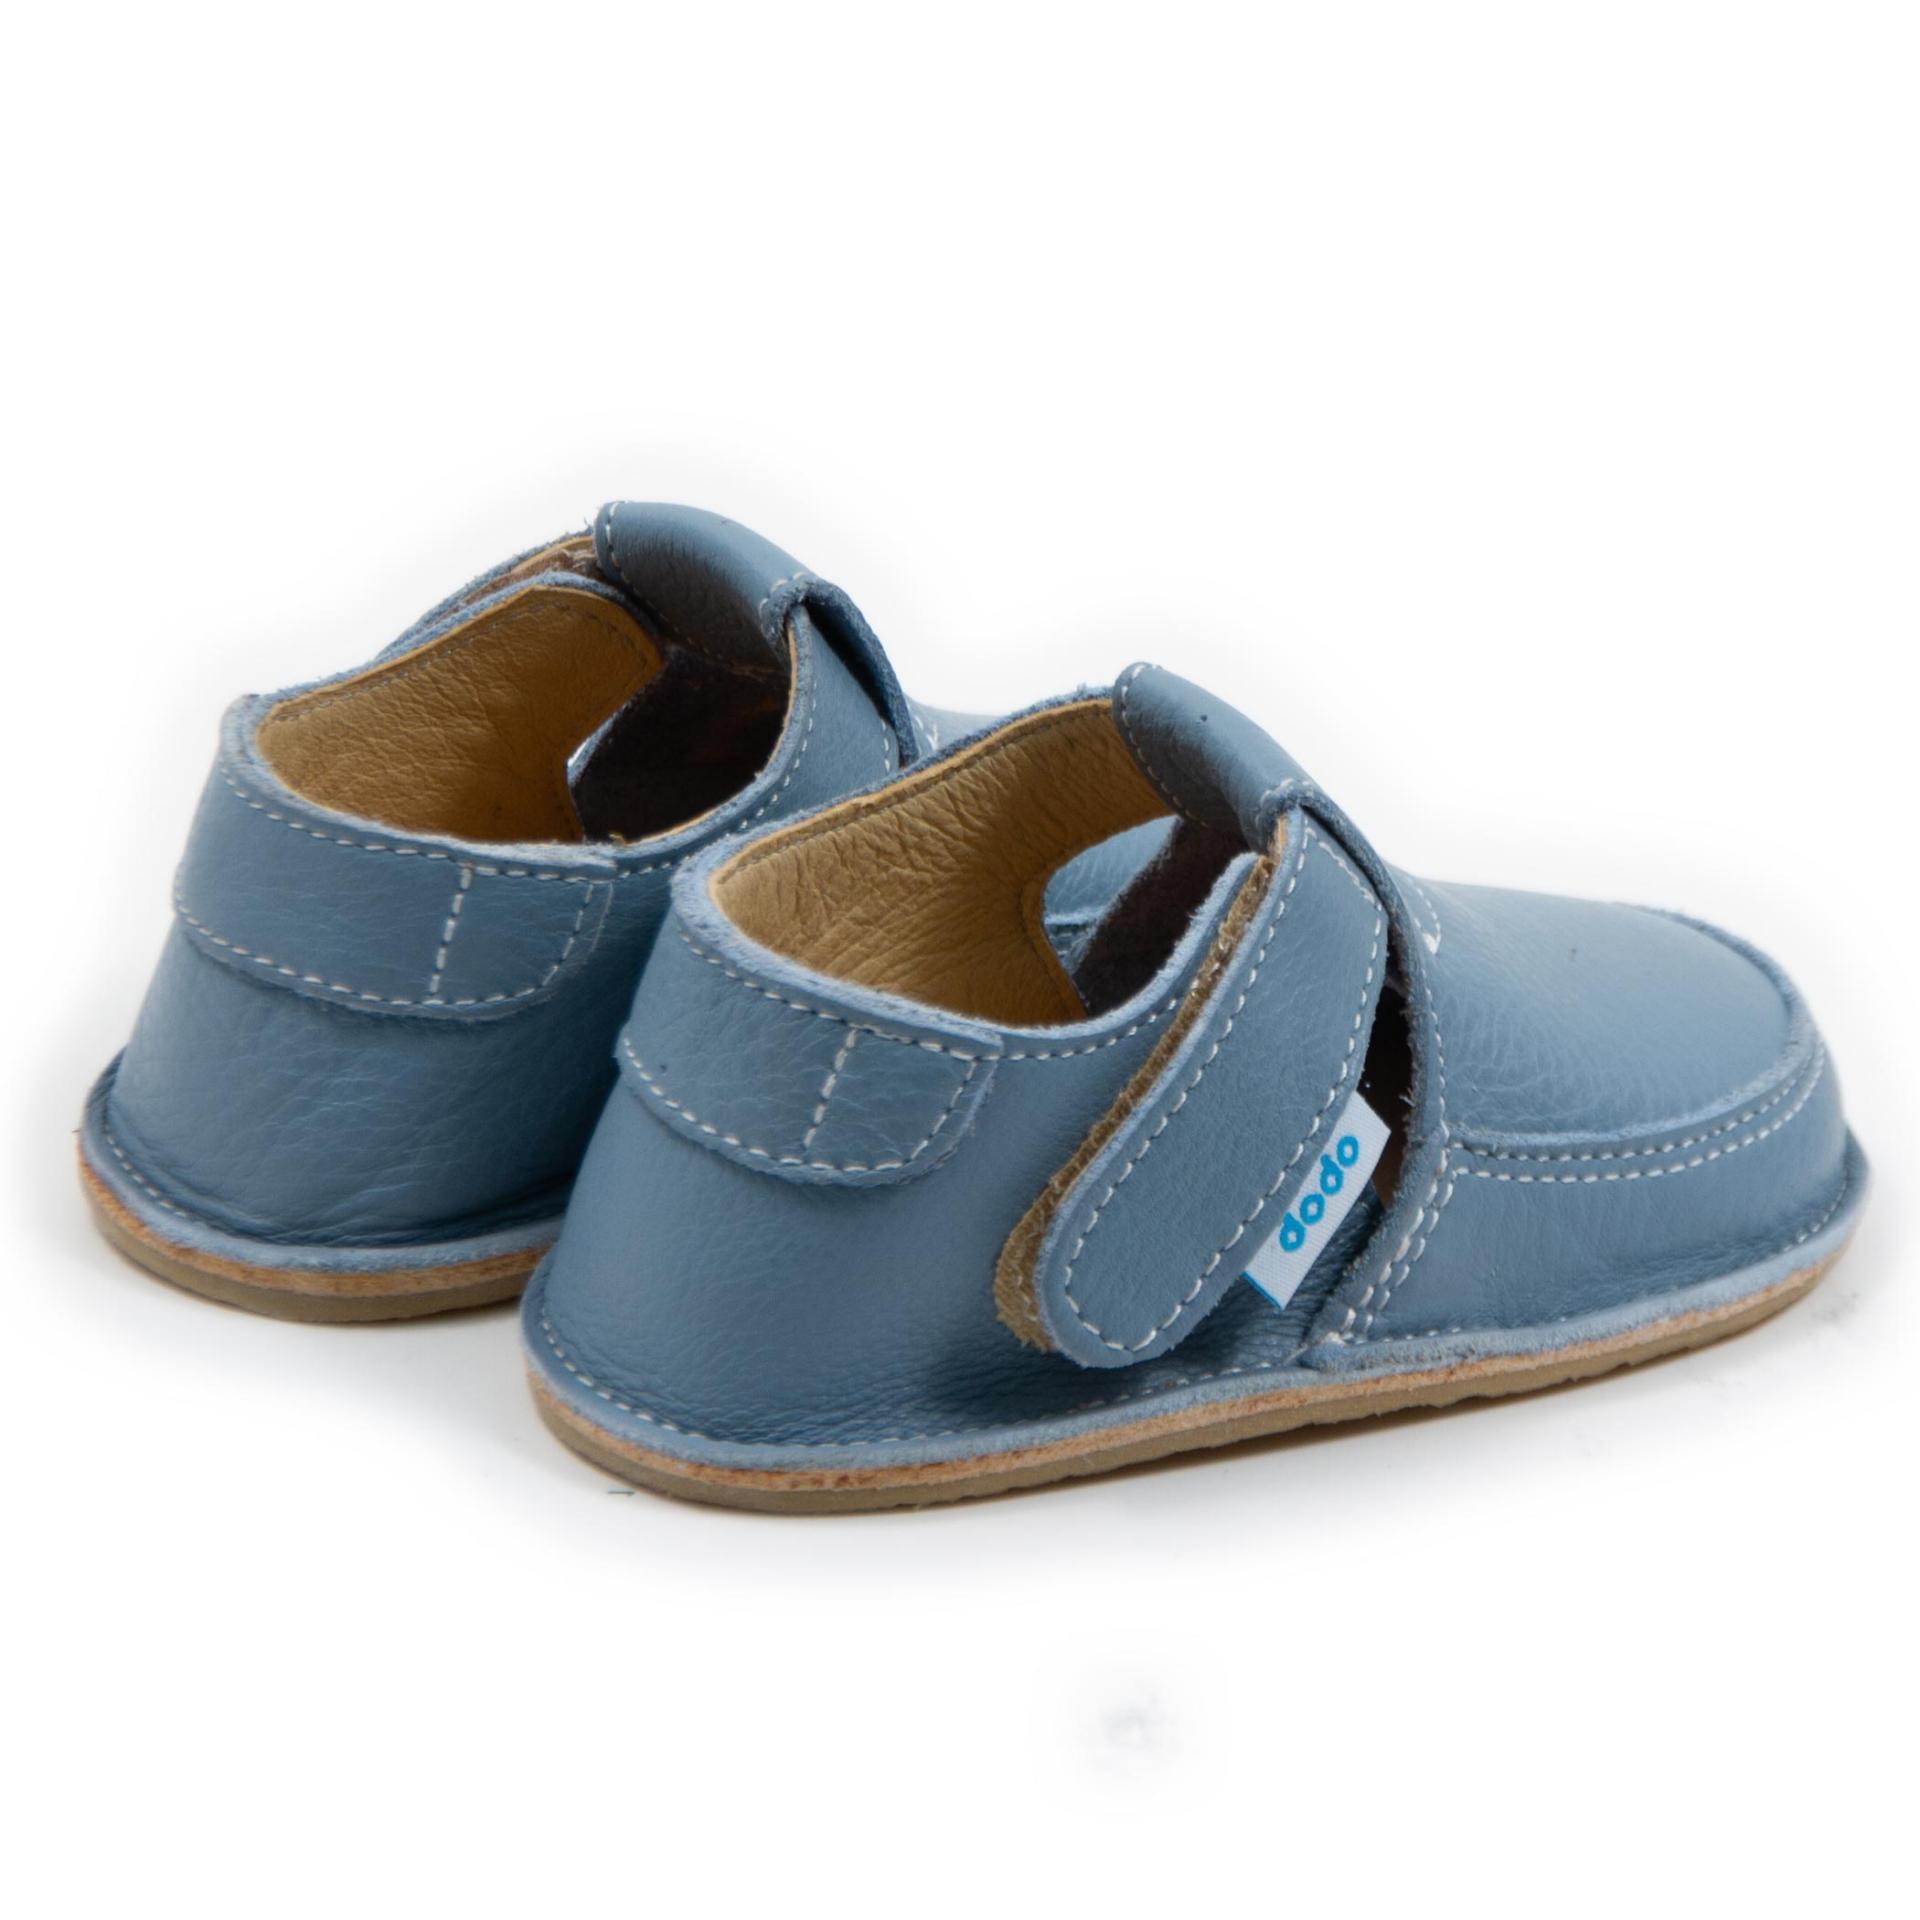 First Barefoot Shoes for Baby - Baloo 2.0 - Navy Blue | Child | Learning to Walk | Non-Slip | Spring | Summer | Autumn | Natural Nappa Cowhide Leather